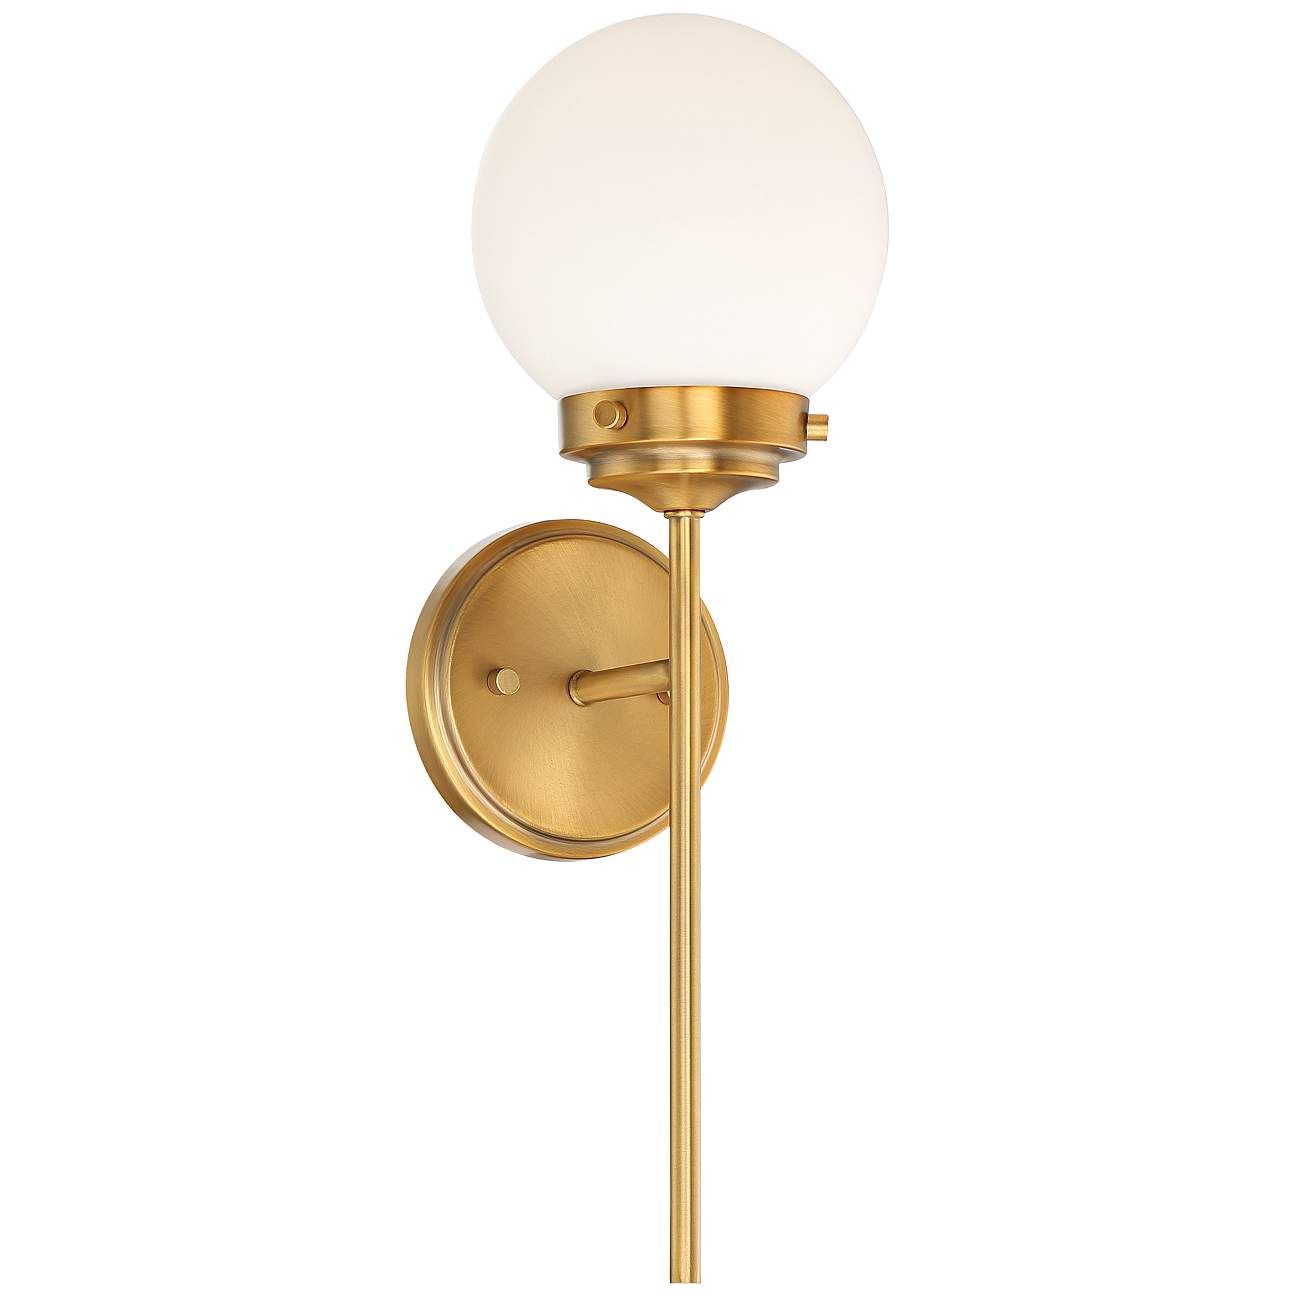 Ayva 18" High Brass and White Glass Wall Sconce - #70F24 | Lamps Plus | Lamps Plus